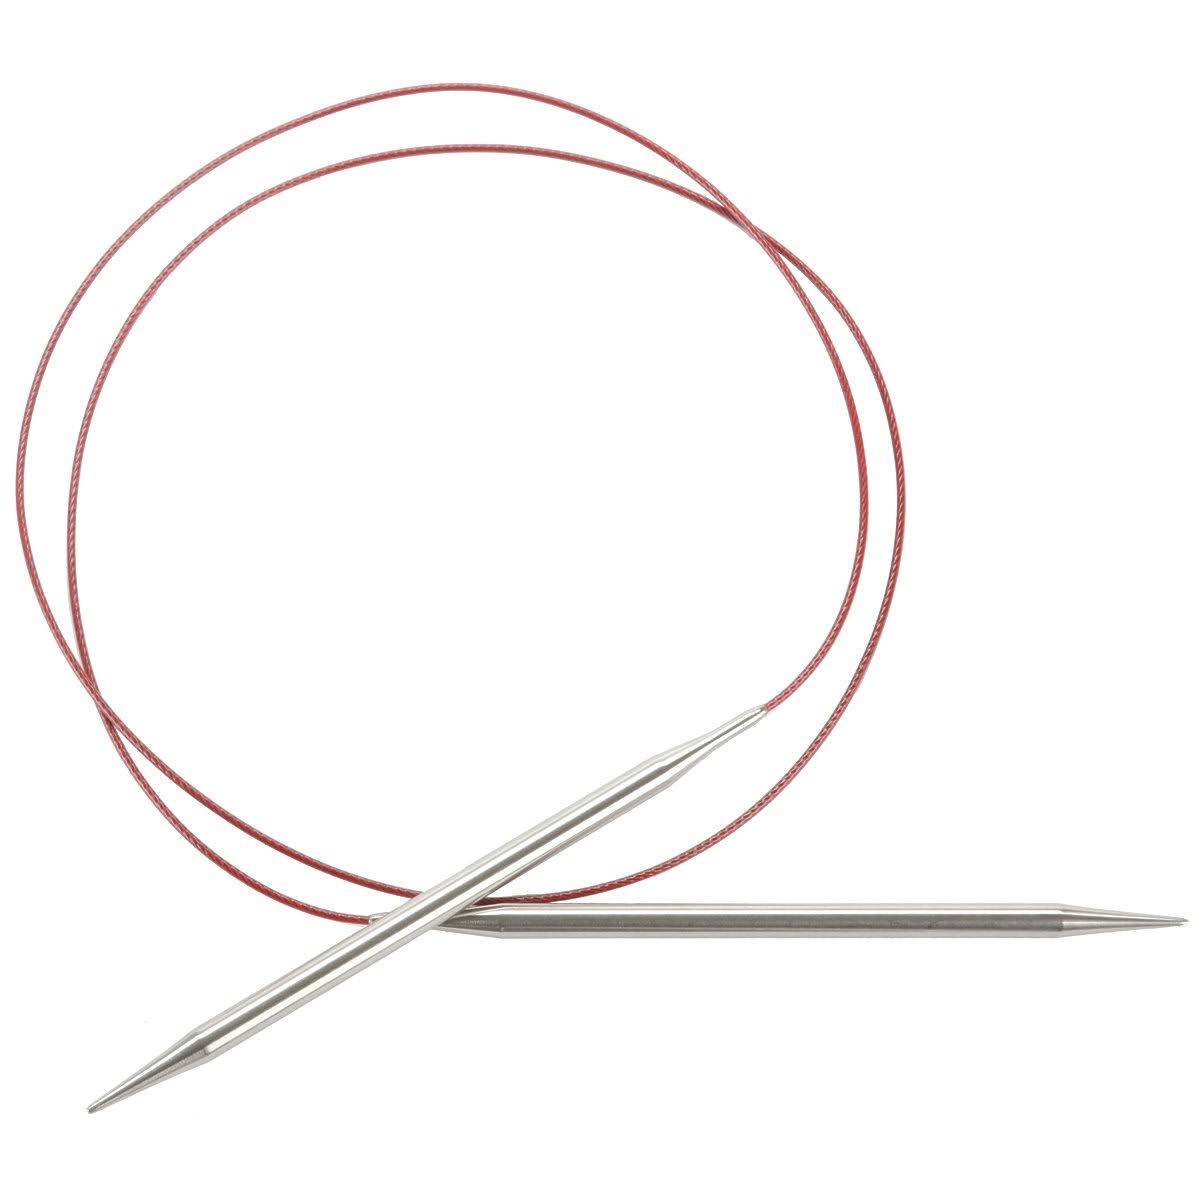 Chiaogoo Stainless Steel Circular Knitting Needles - 40", 1 US, Red Lace